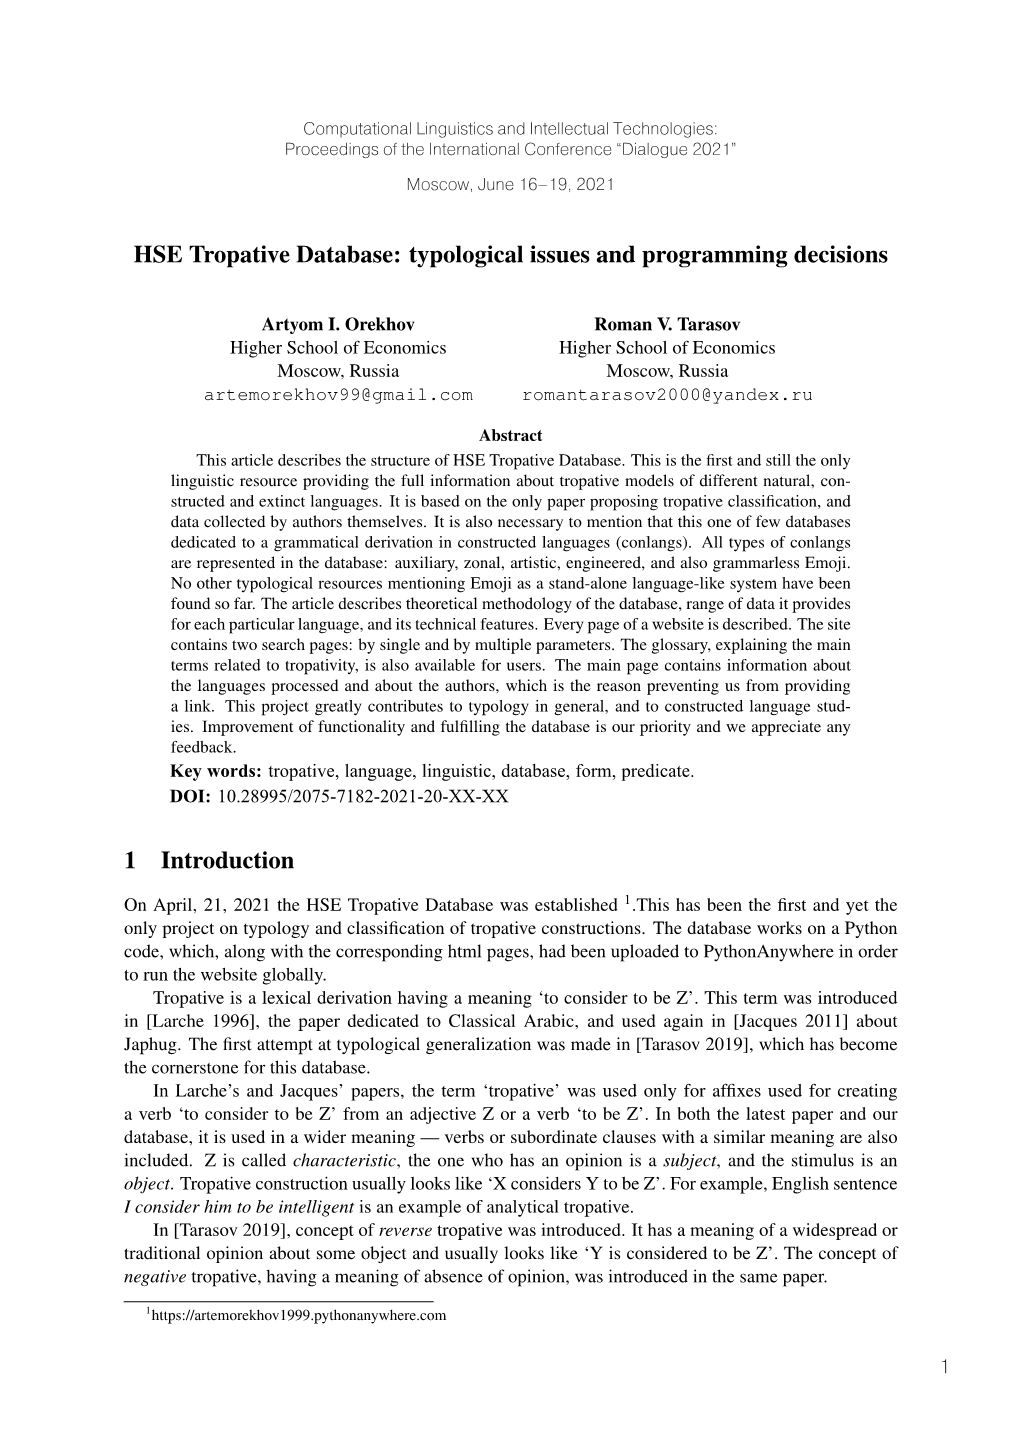 HSE Tropative Database: Typological Issues and Programming Decisions